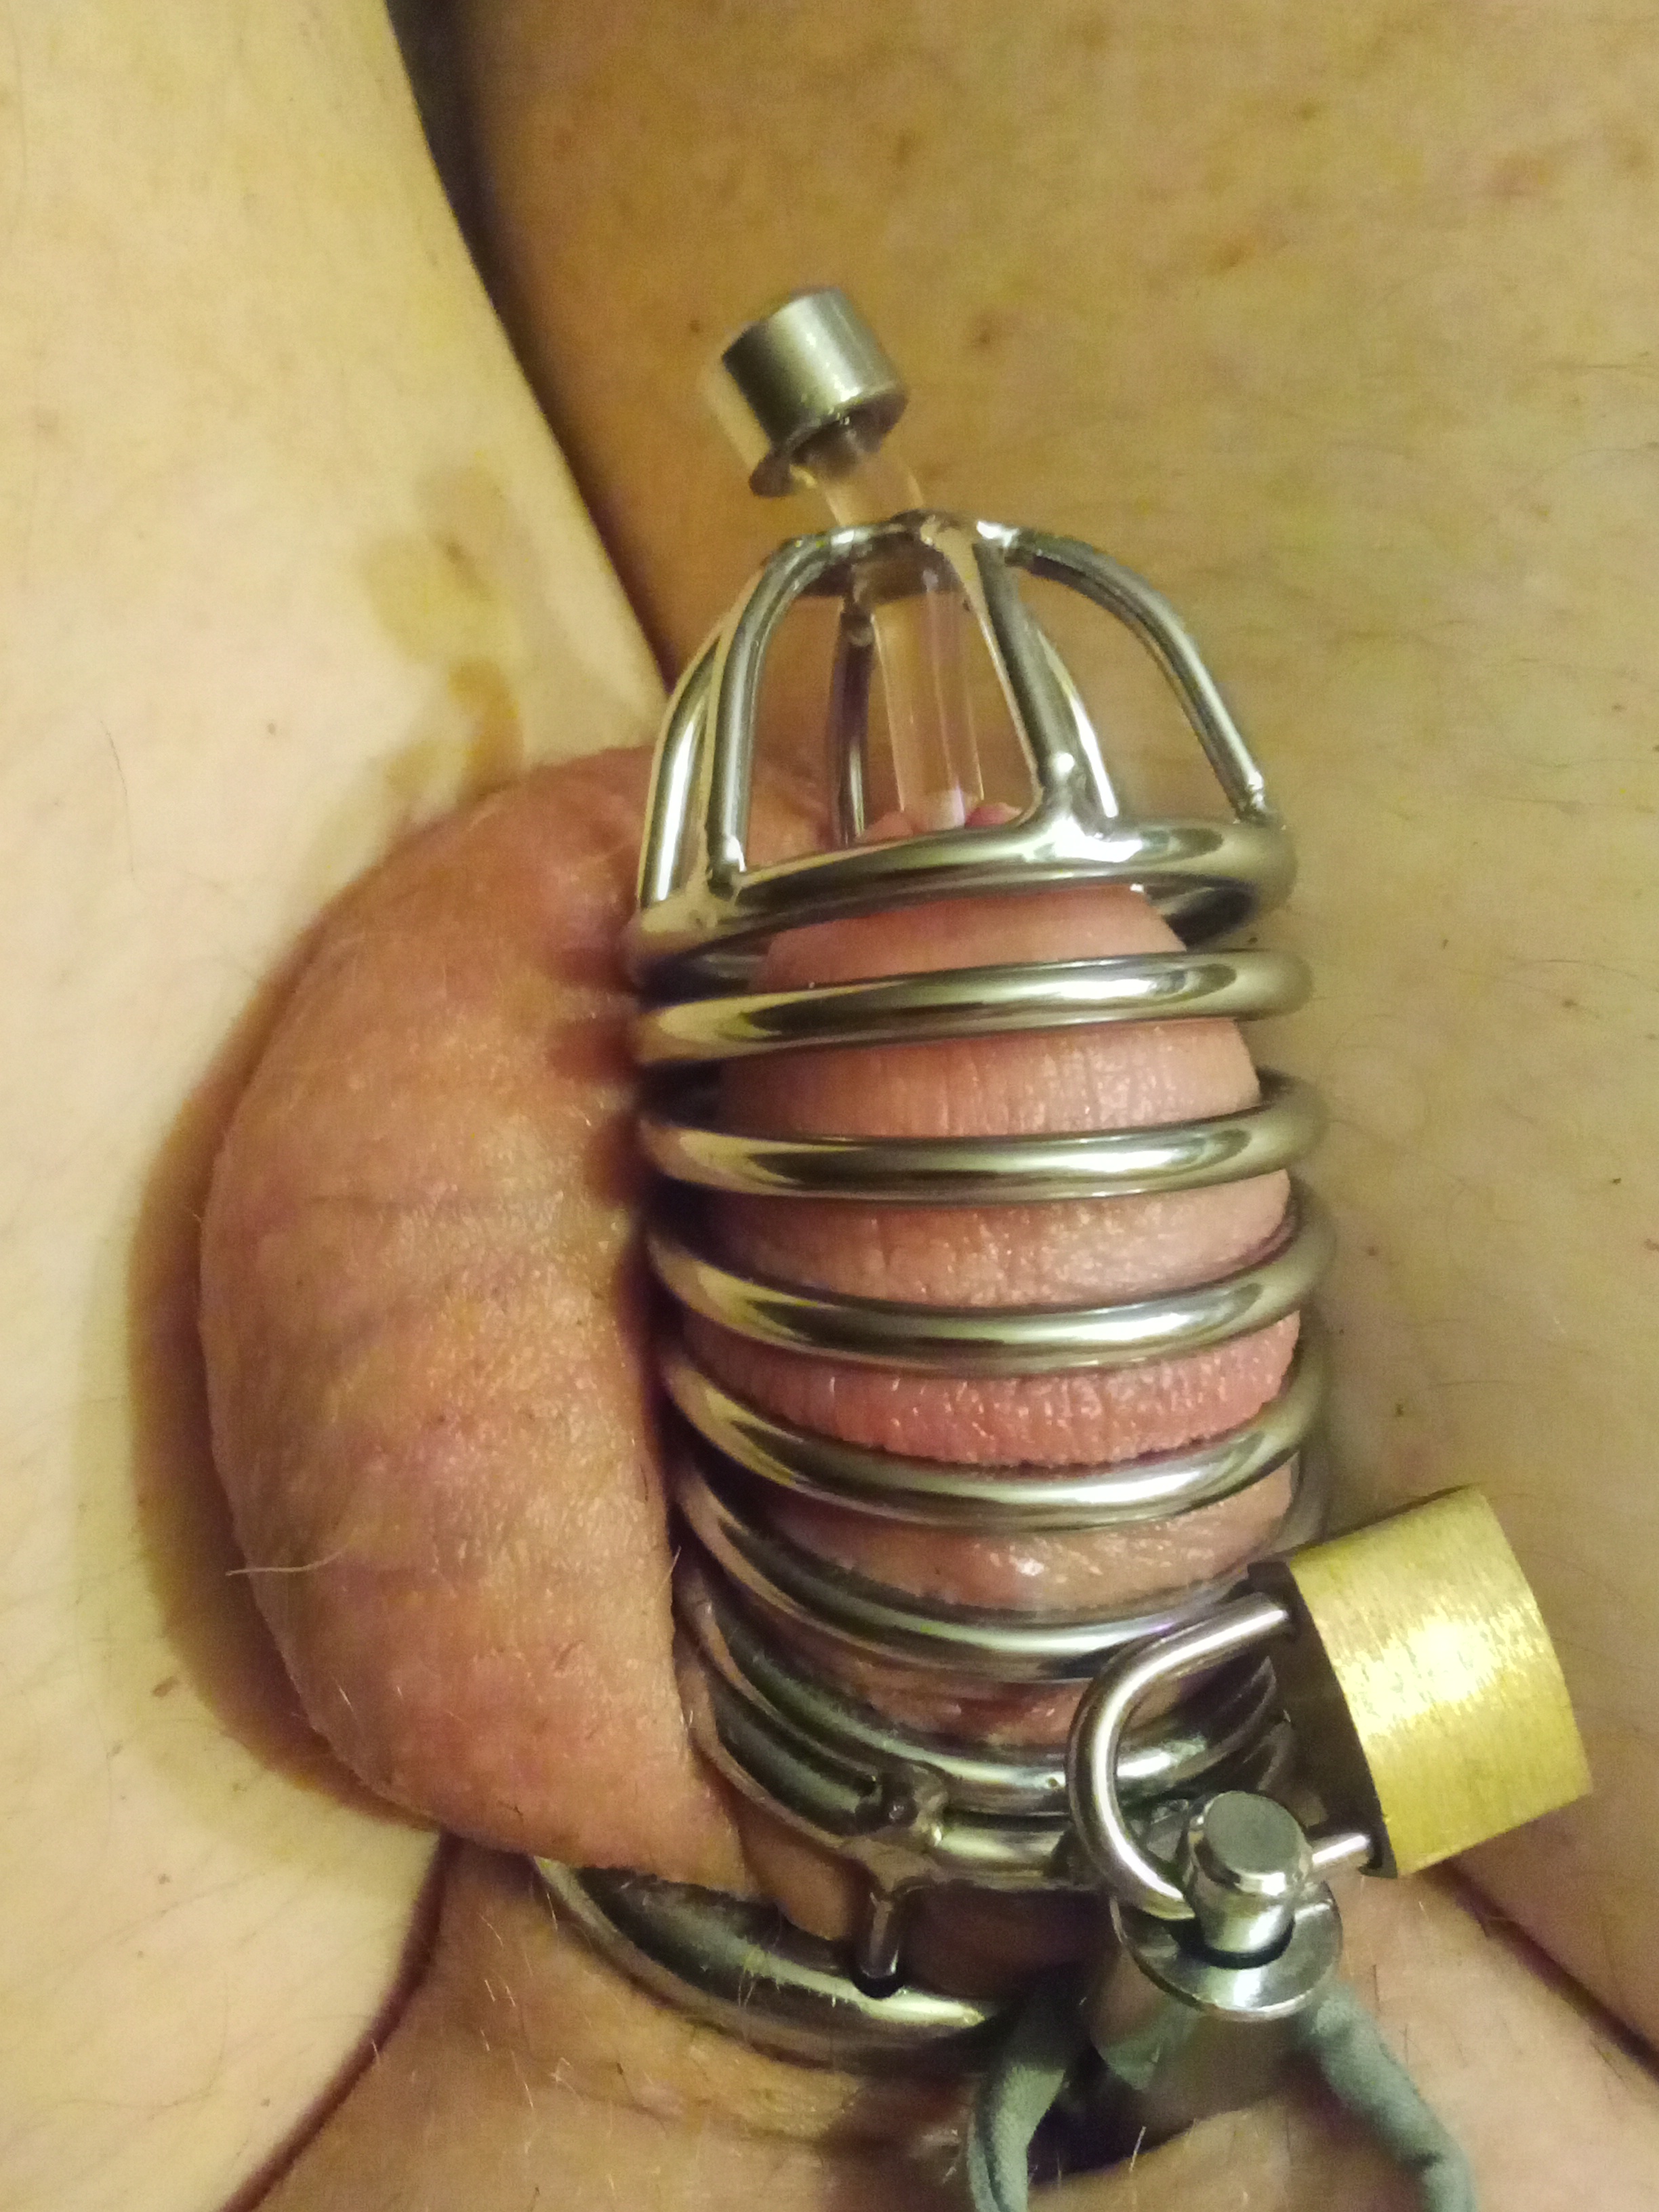 Closeup of my penis in the chastity 
				cage with the small catheter inserted and attached to the cage